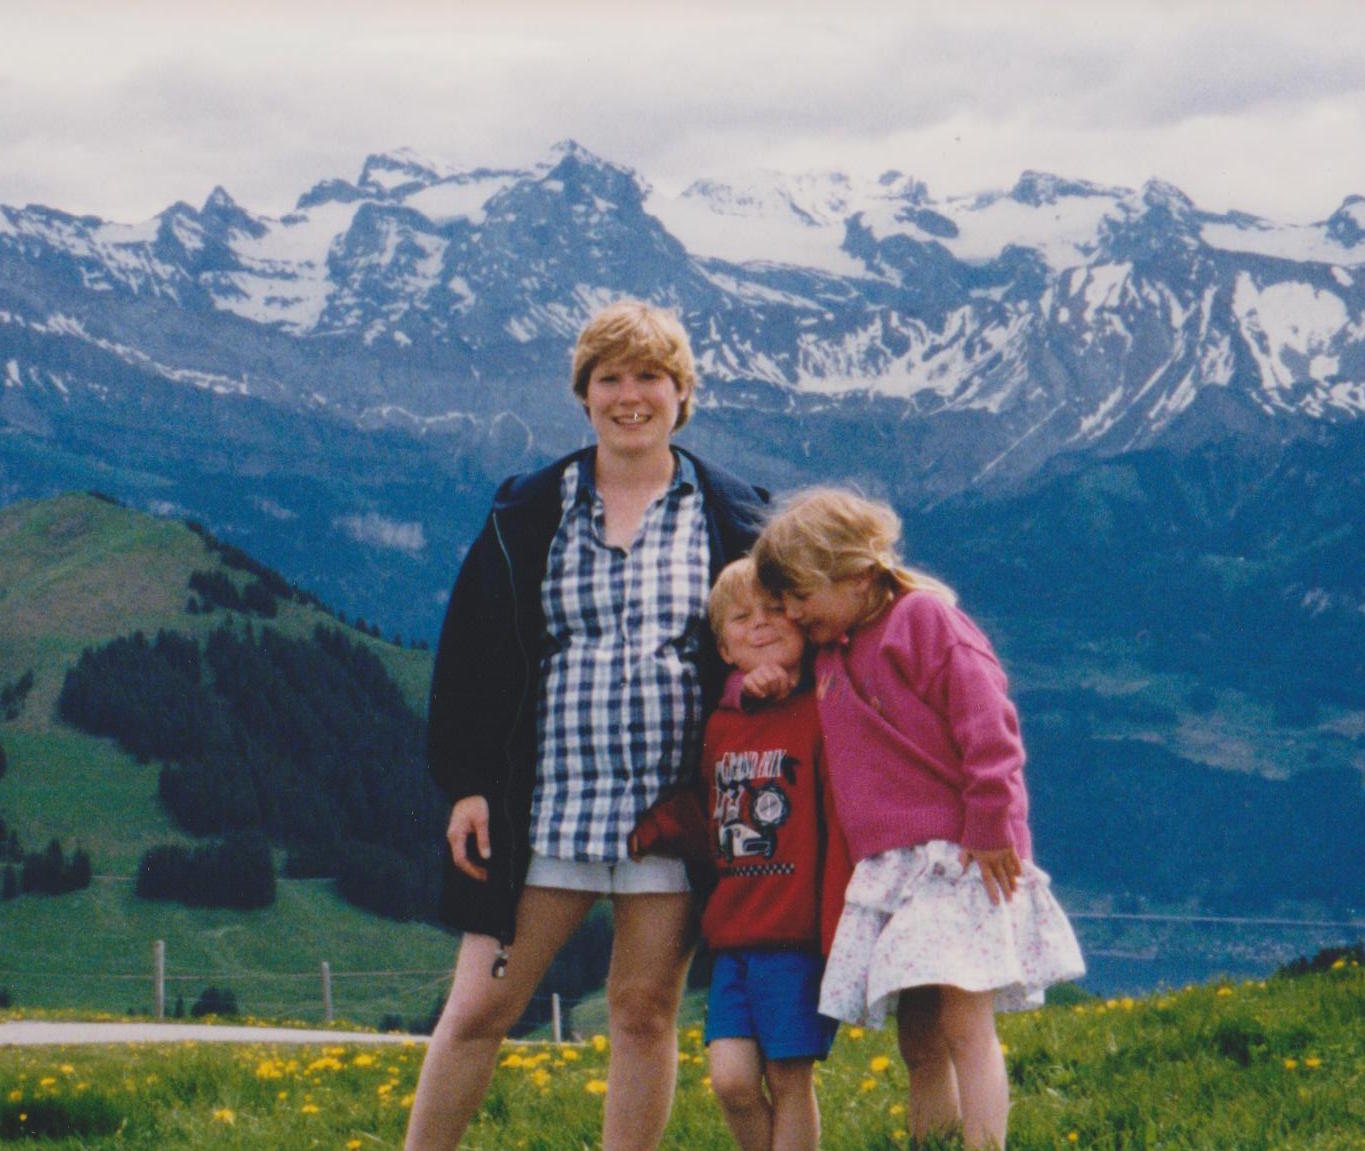 6-year-old me (right), on a mountain in a dress